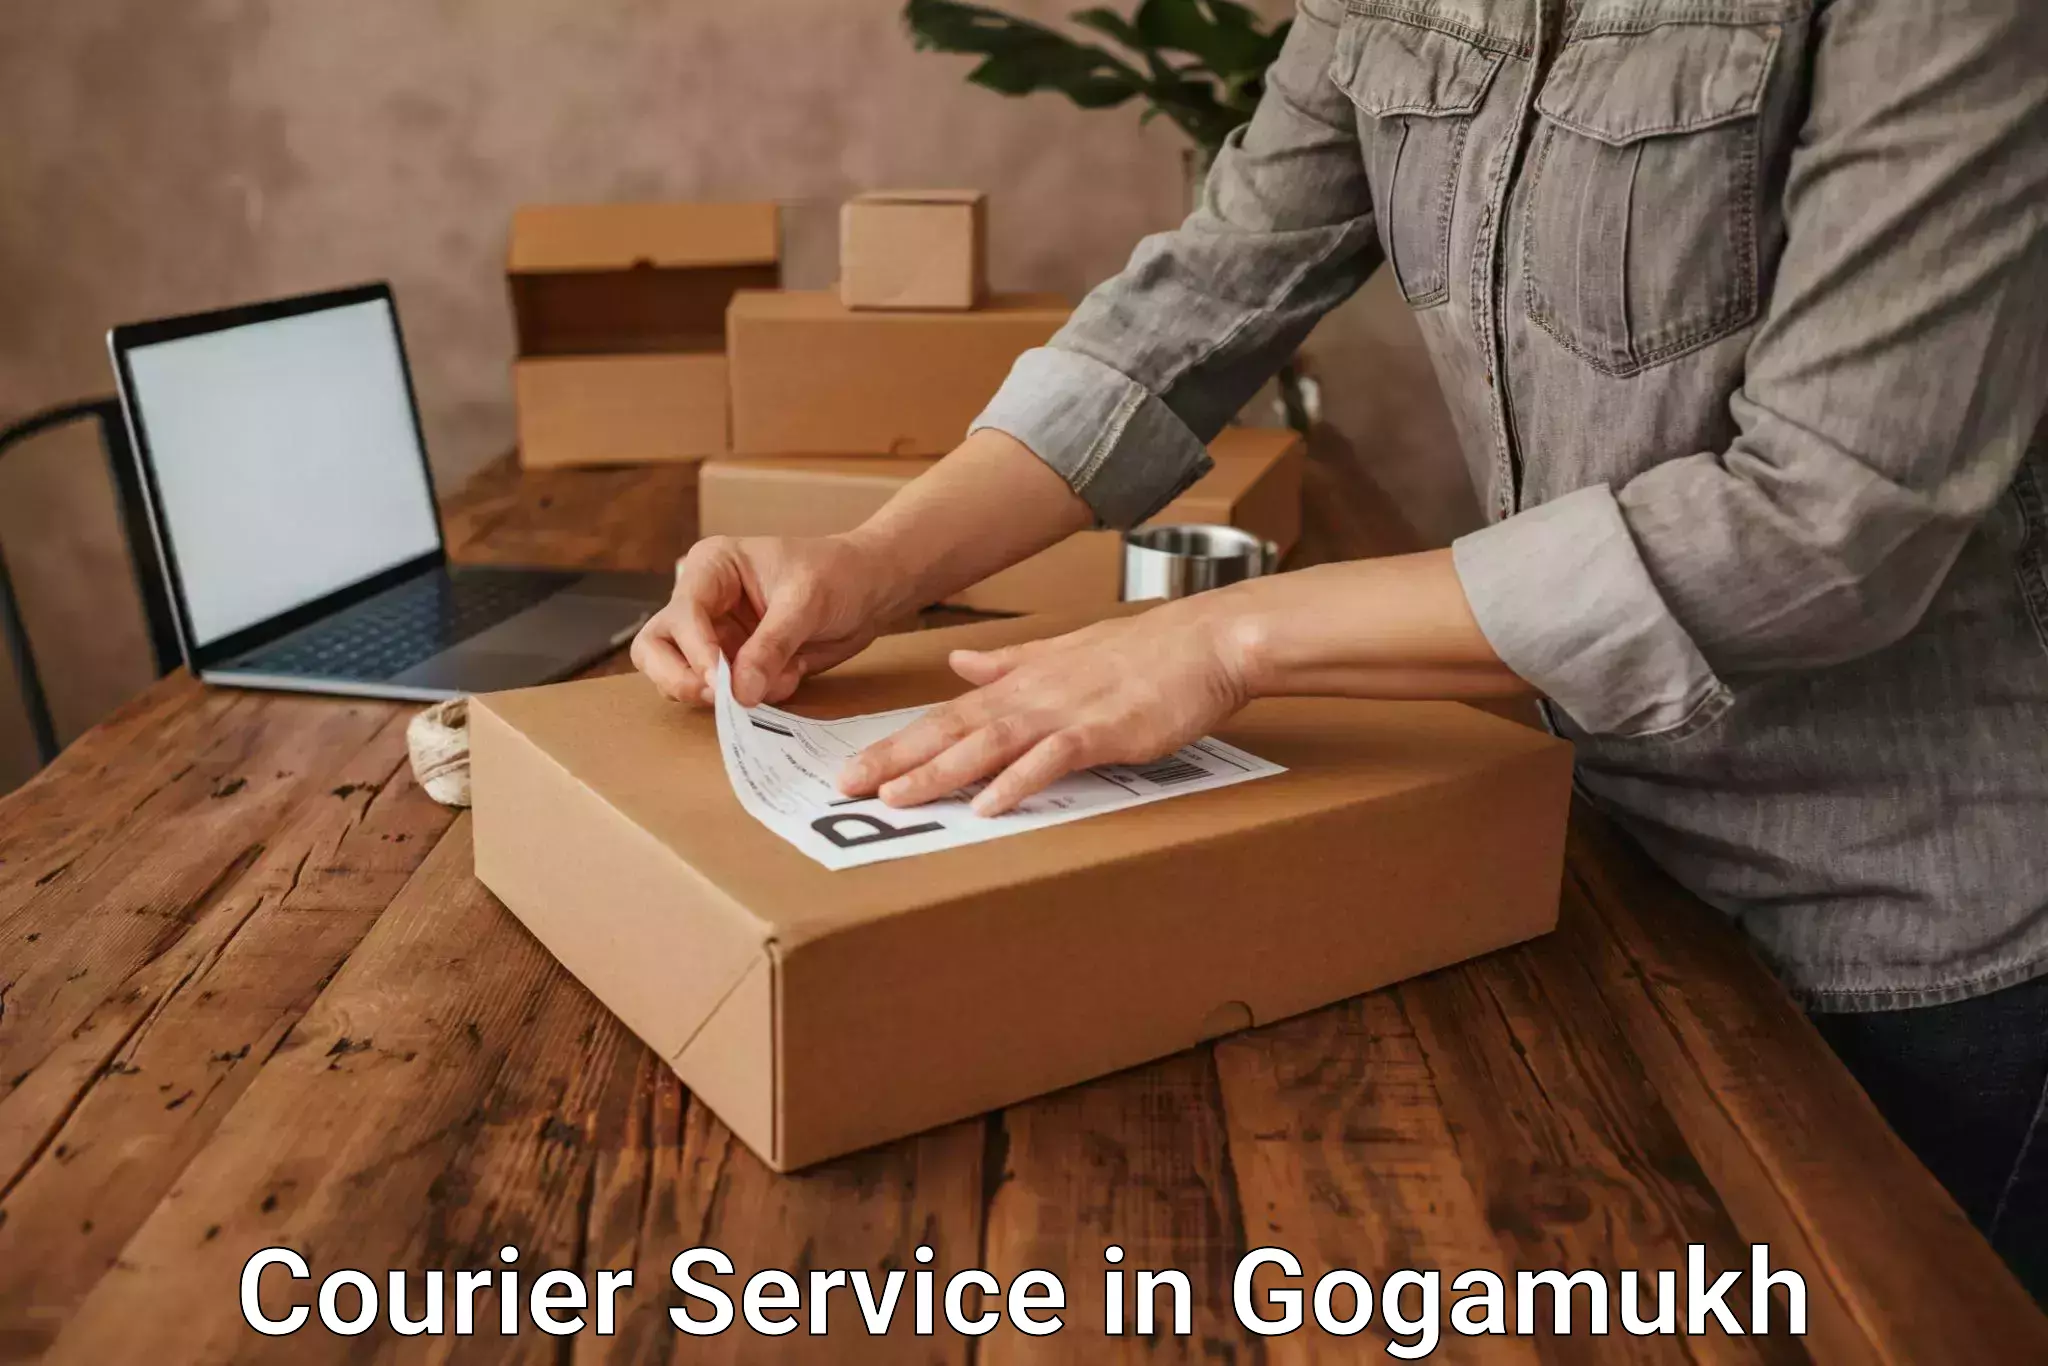 Full-service courier options in Gogamukh